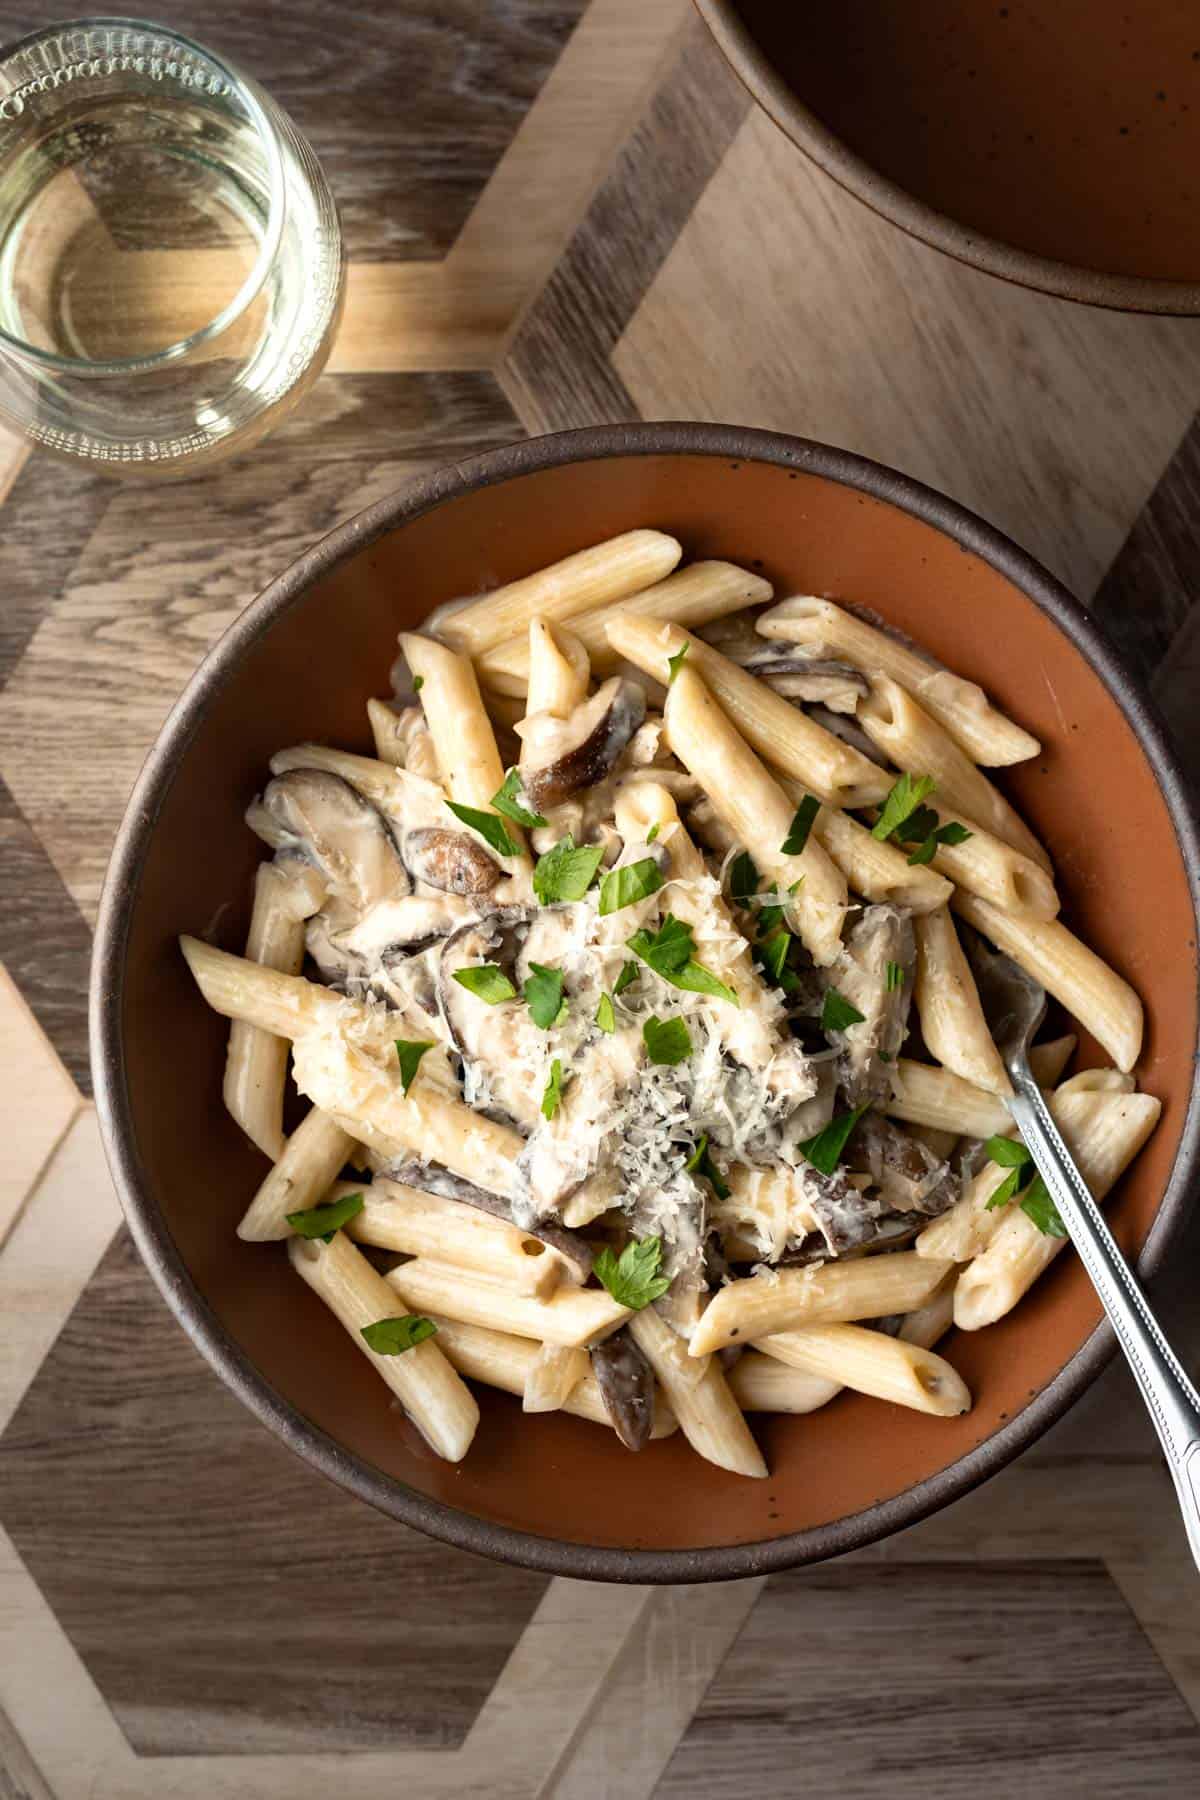 Shiitake mushroom pasta in a bowl with a fork and glass of white wine nearby.